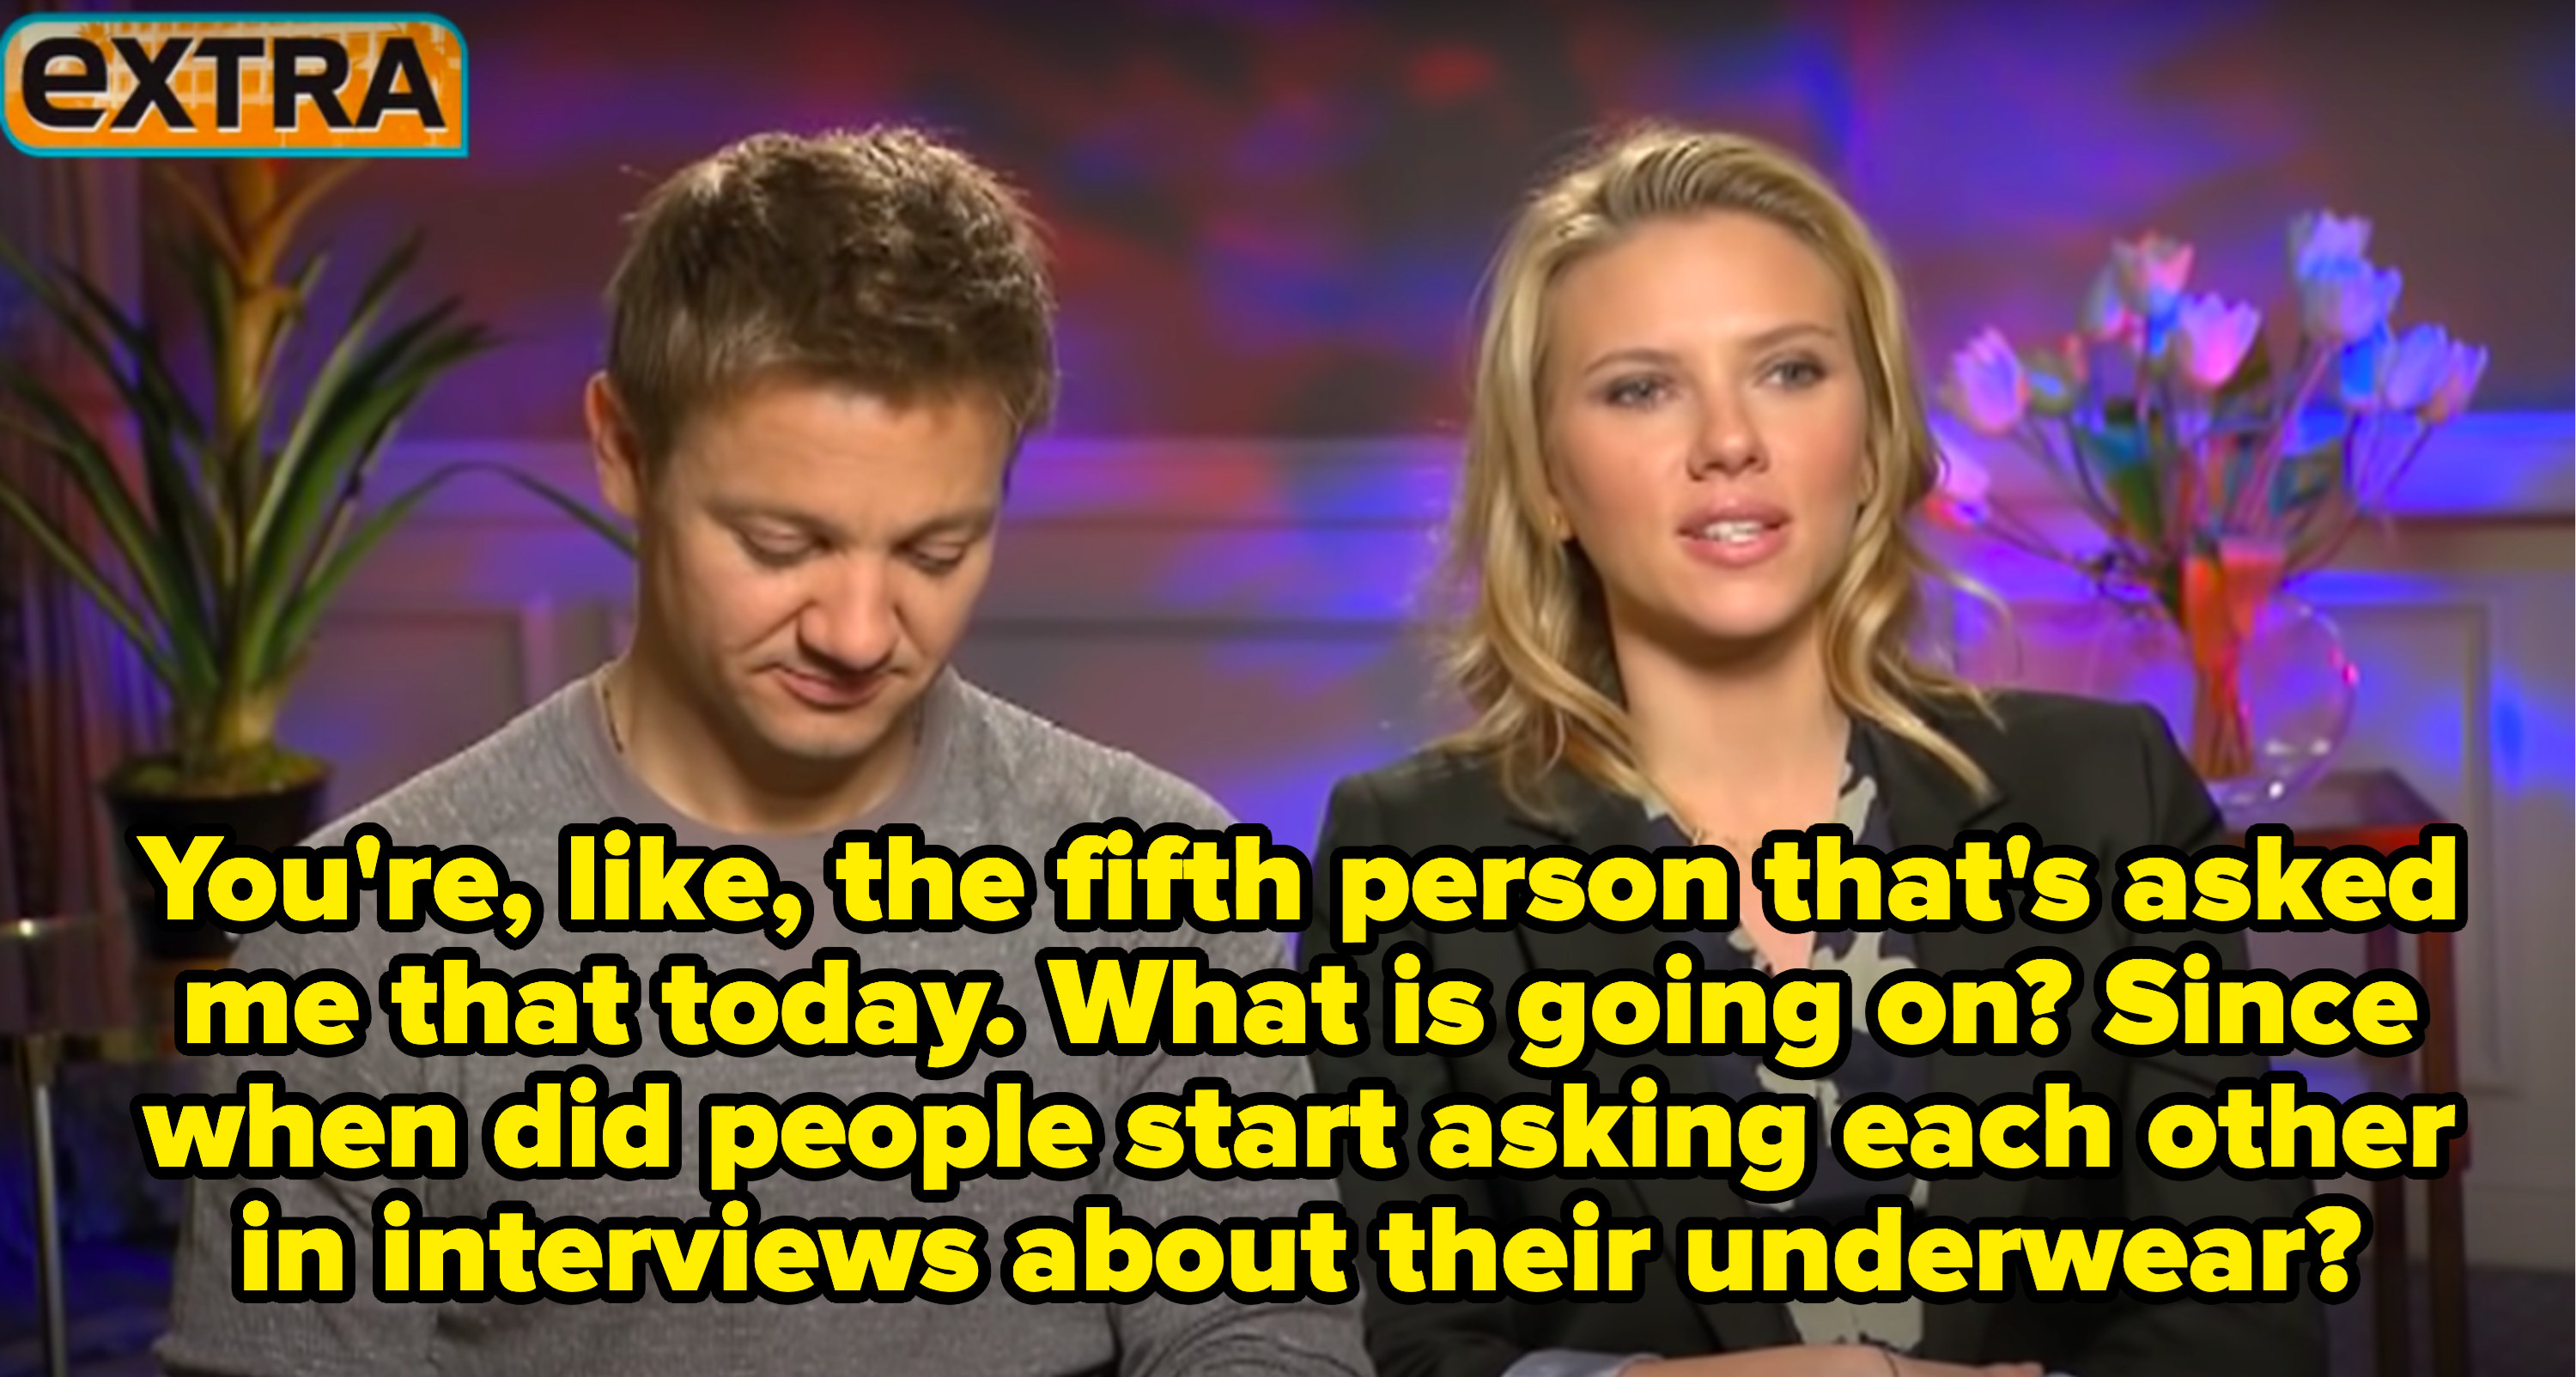 Scarlett saying this is the fifth interviewer to ask her this question today, and &quot;since when did people start asking each other in interviews about their underwear?&quot;